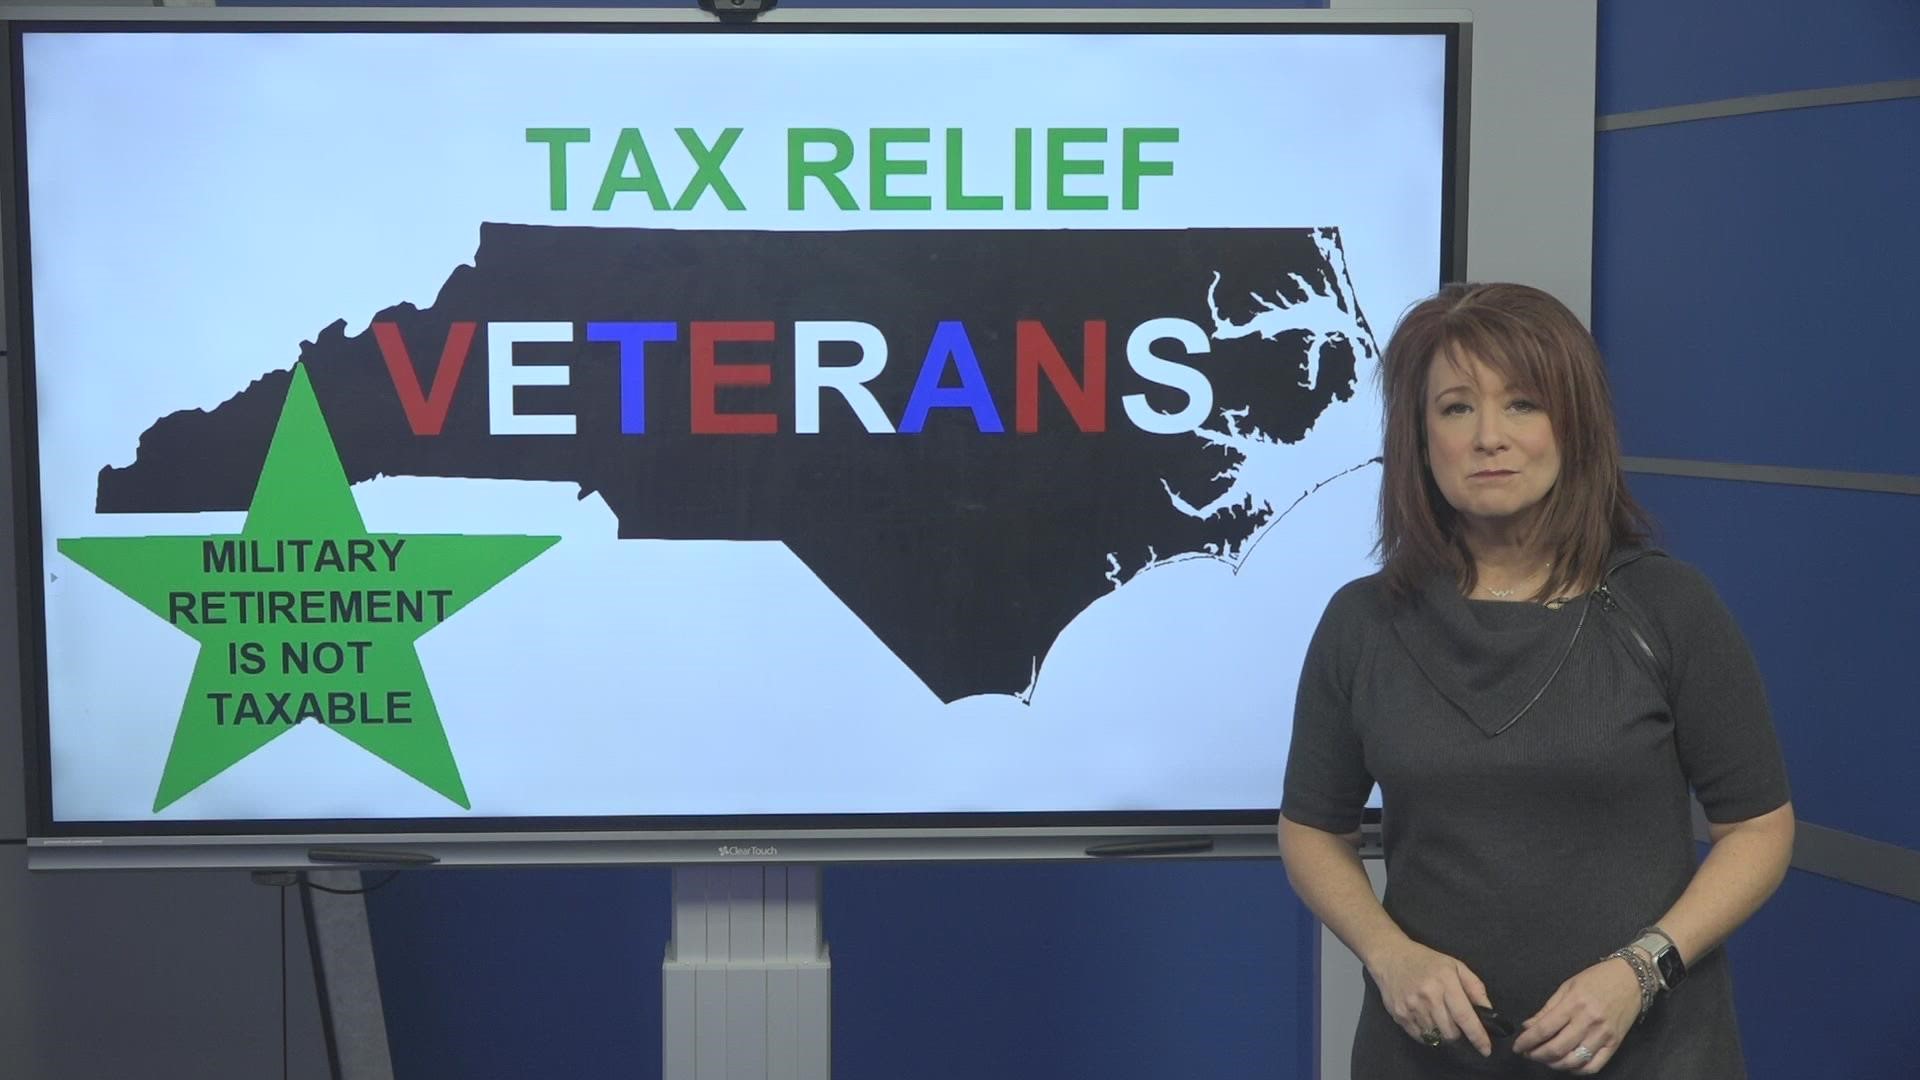 In 2021, NC stopped taxing retirees on their military retirement benefits.